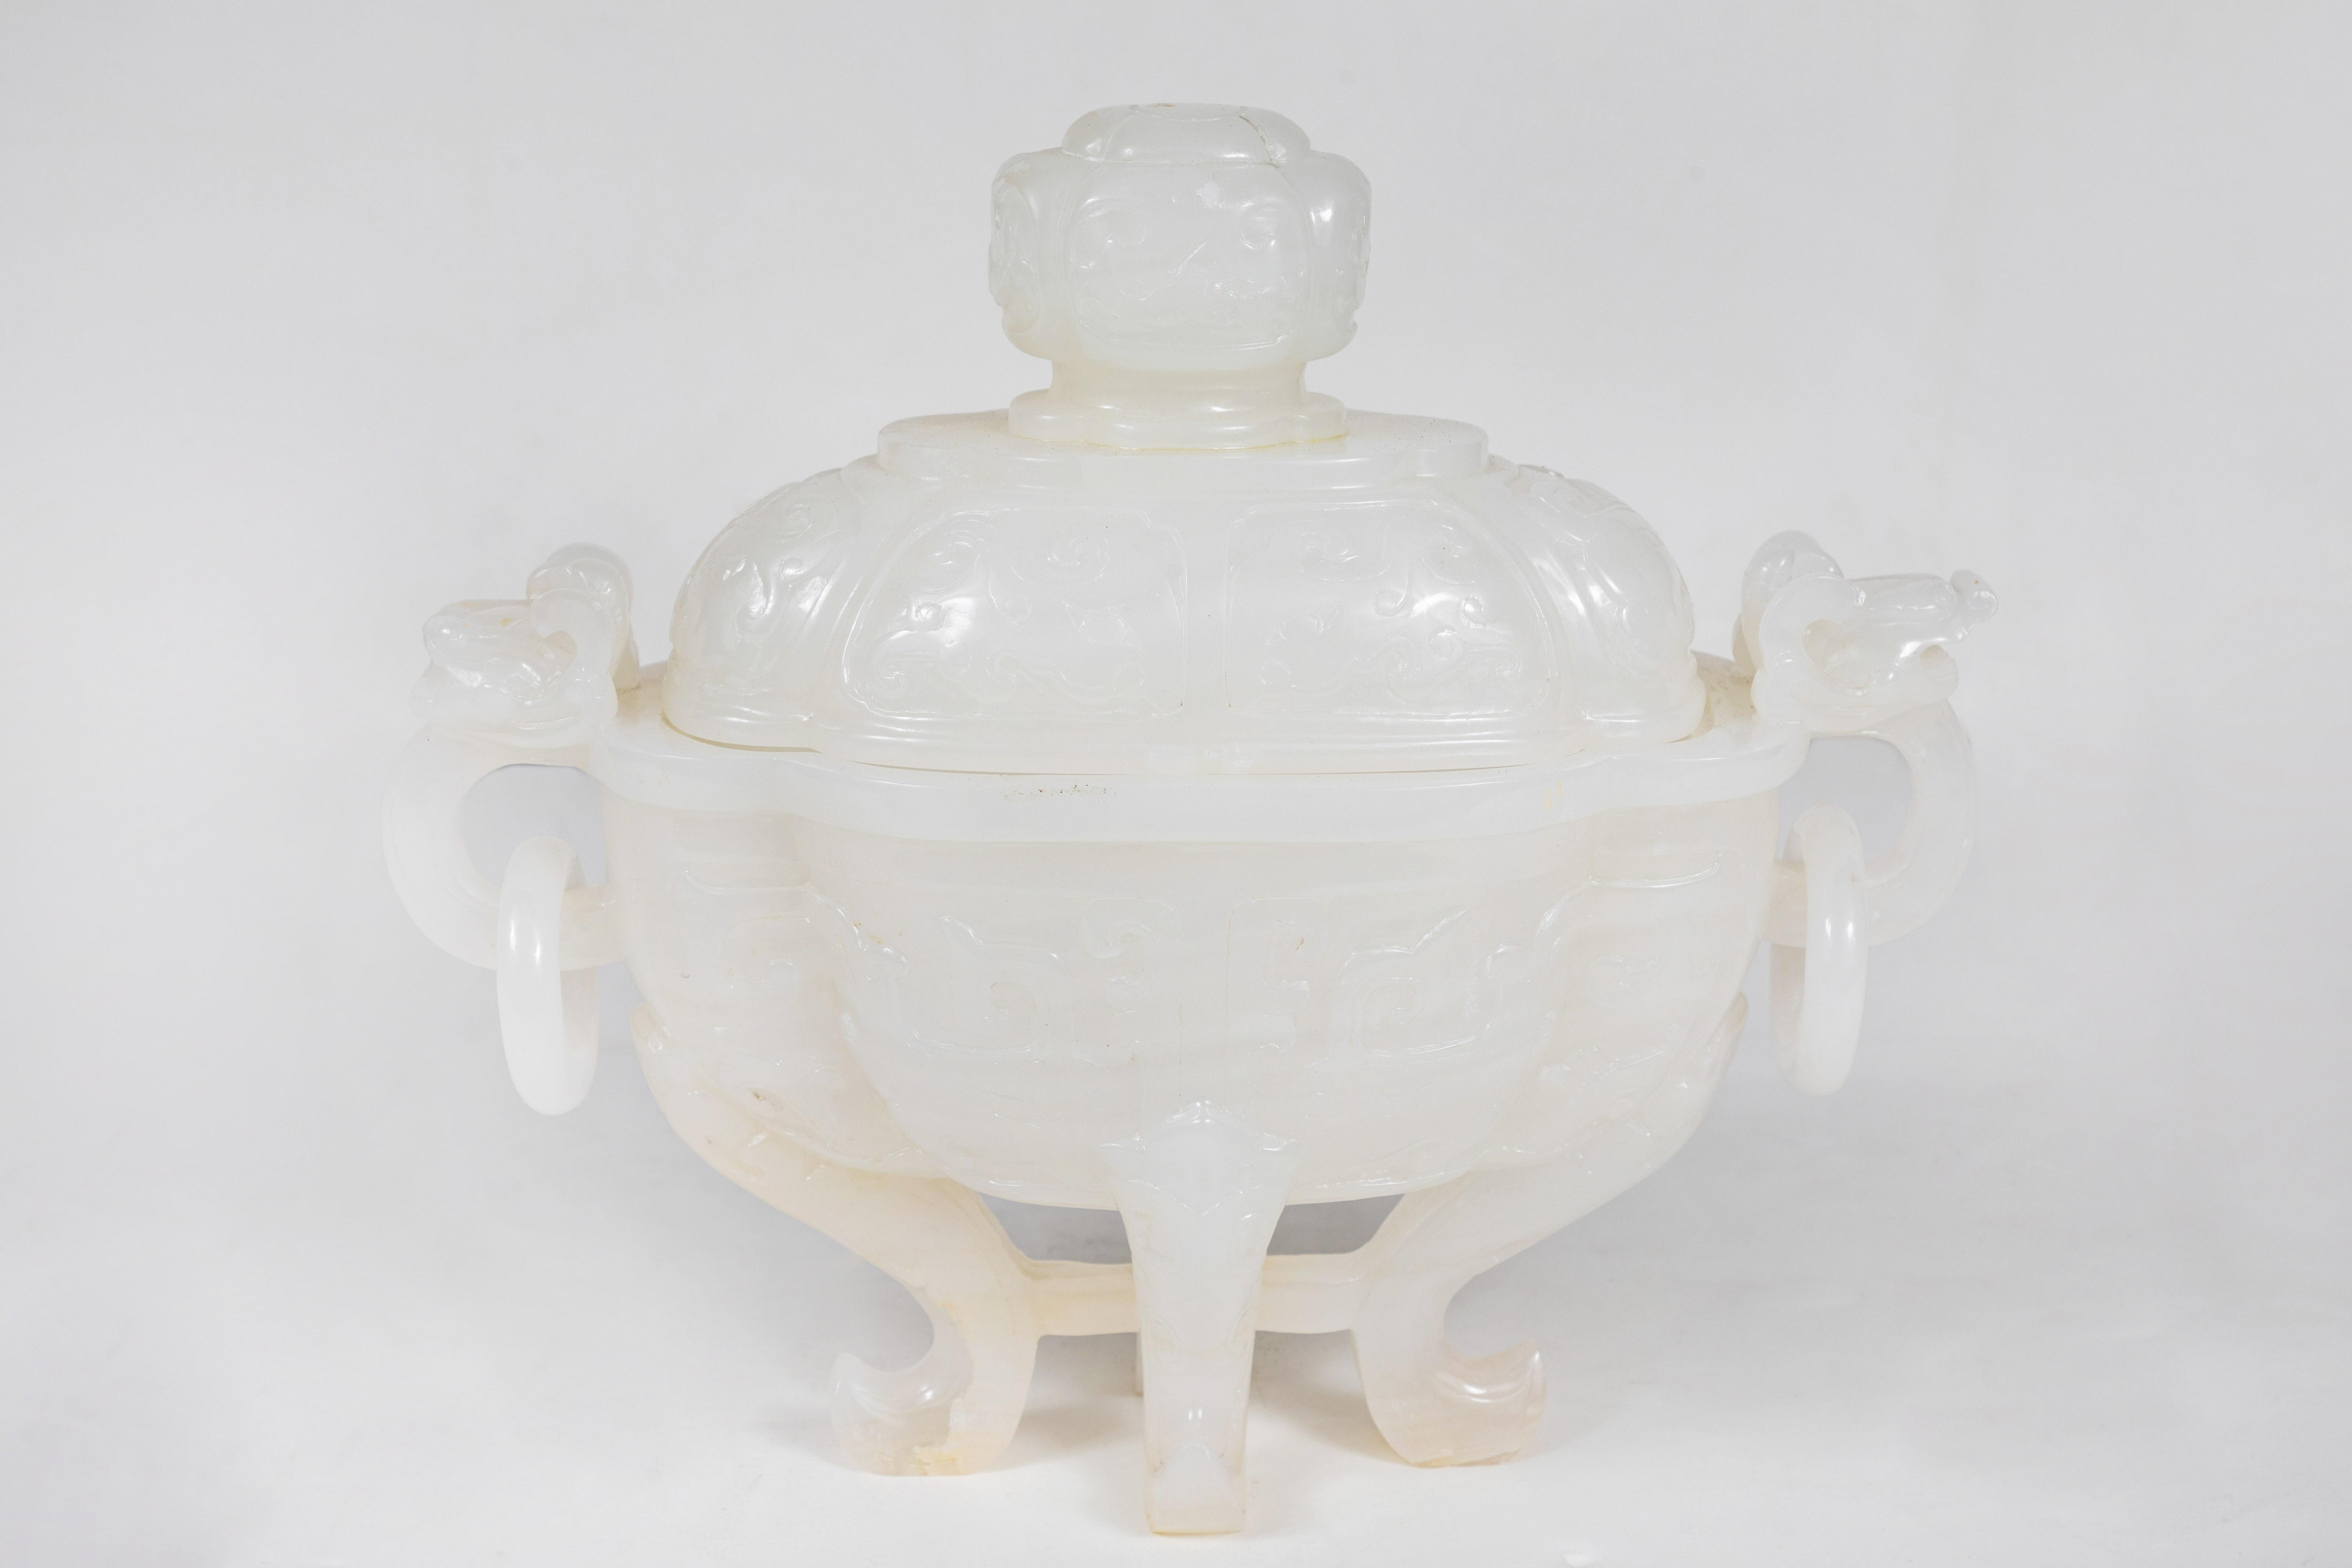 Elegant, relief-carved, polished, circa 1930, white-jade, lidded urn with pierced, dragon form handles atop scrolled feet.